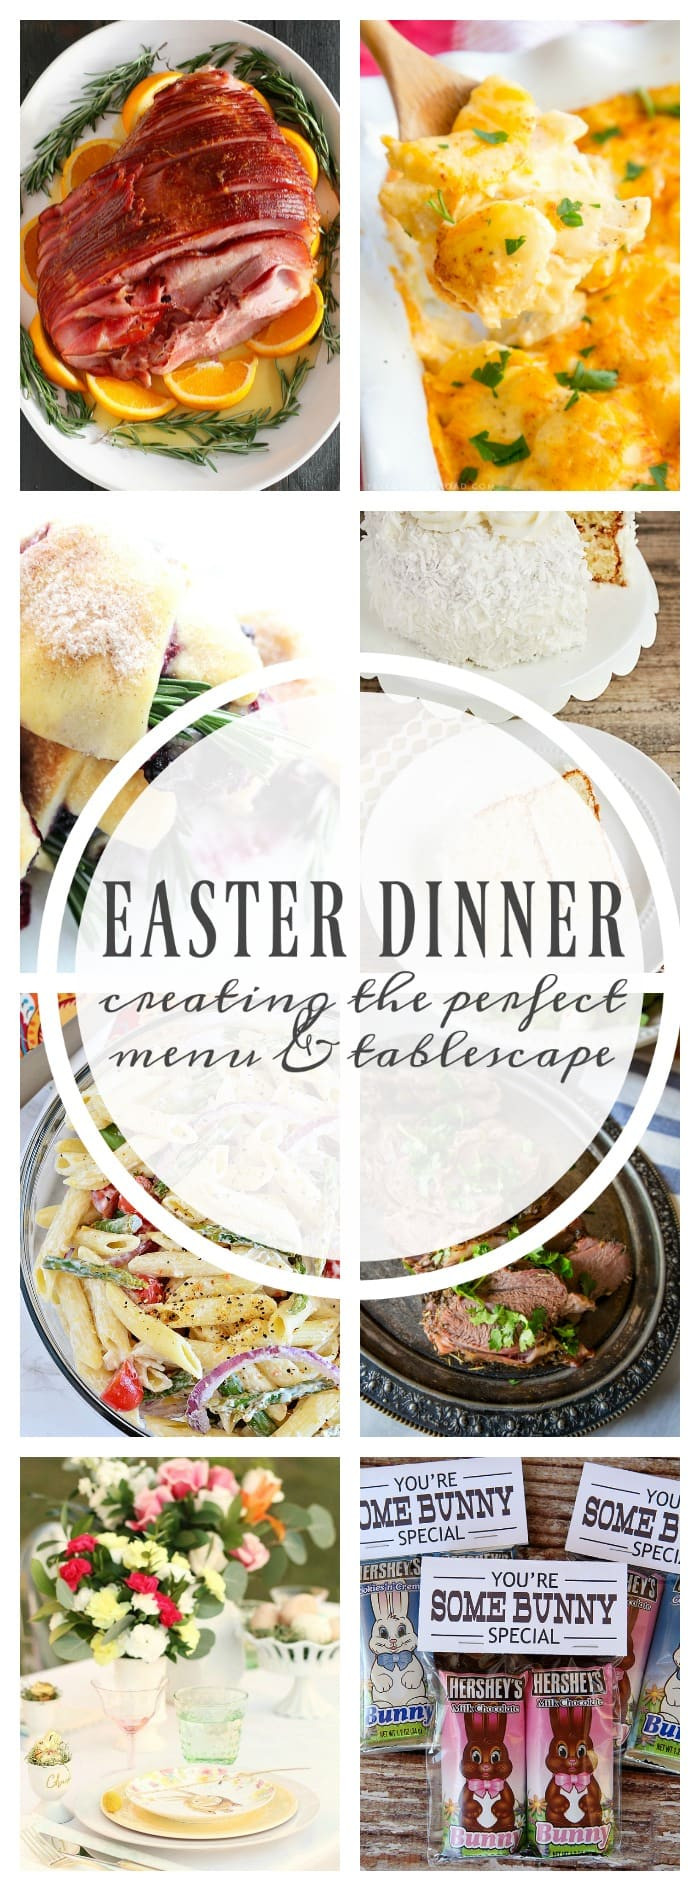 Easter Dinner Specials
 Easter Dinner Creating the Perfect Menu & Tablescape A